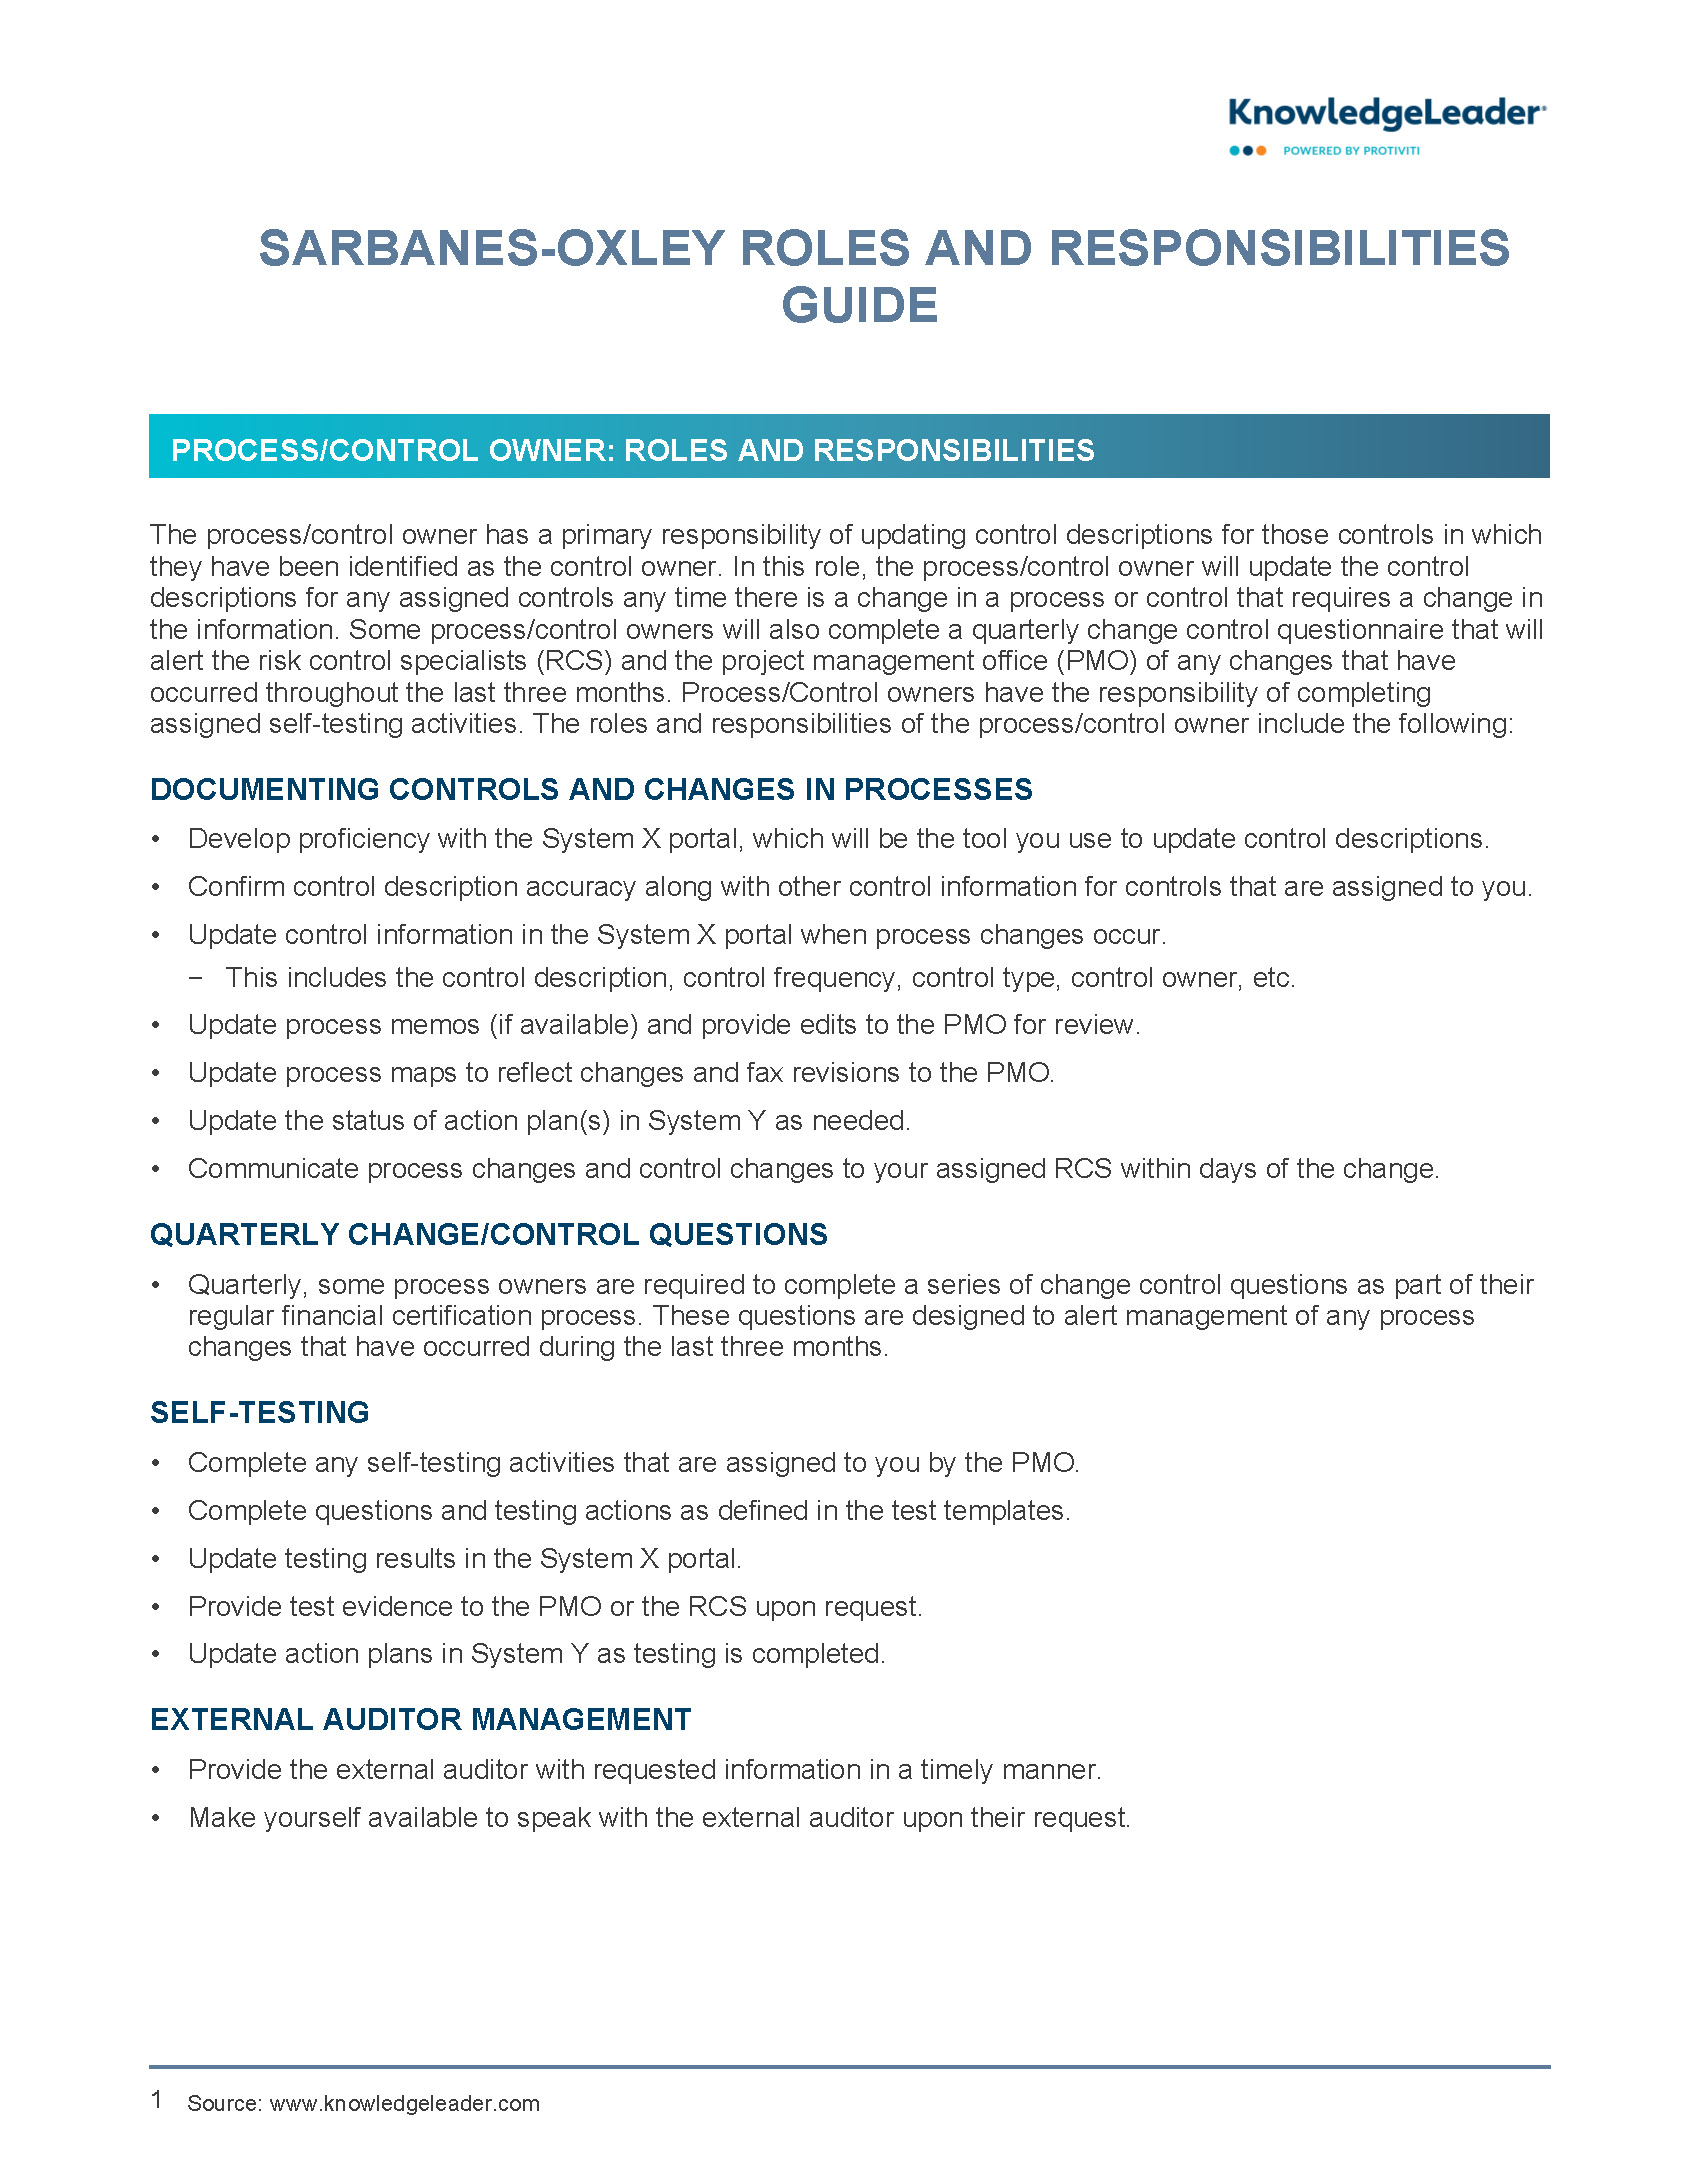 Screenshot of the first page of Sarbanes-Oxley Roles and Responsibilities Guide